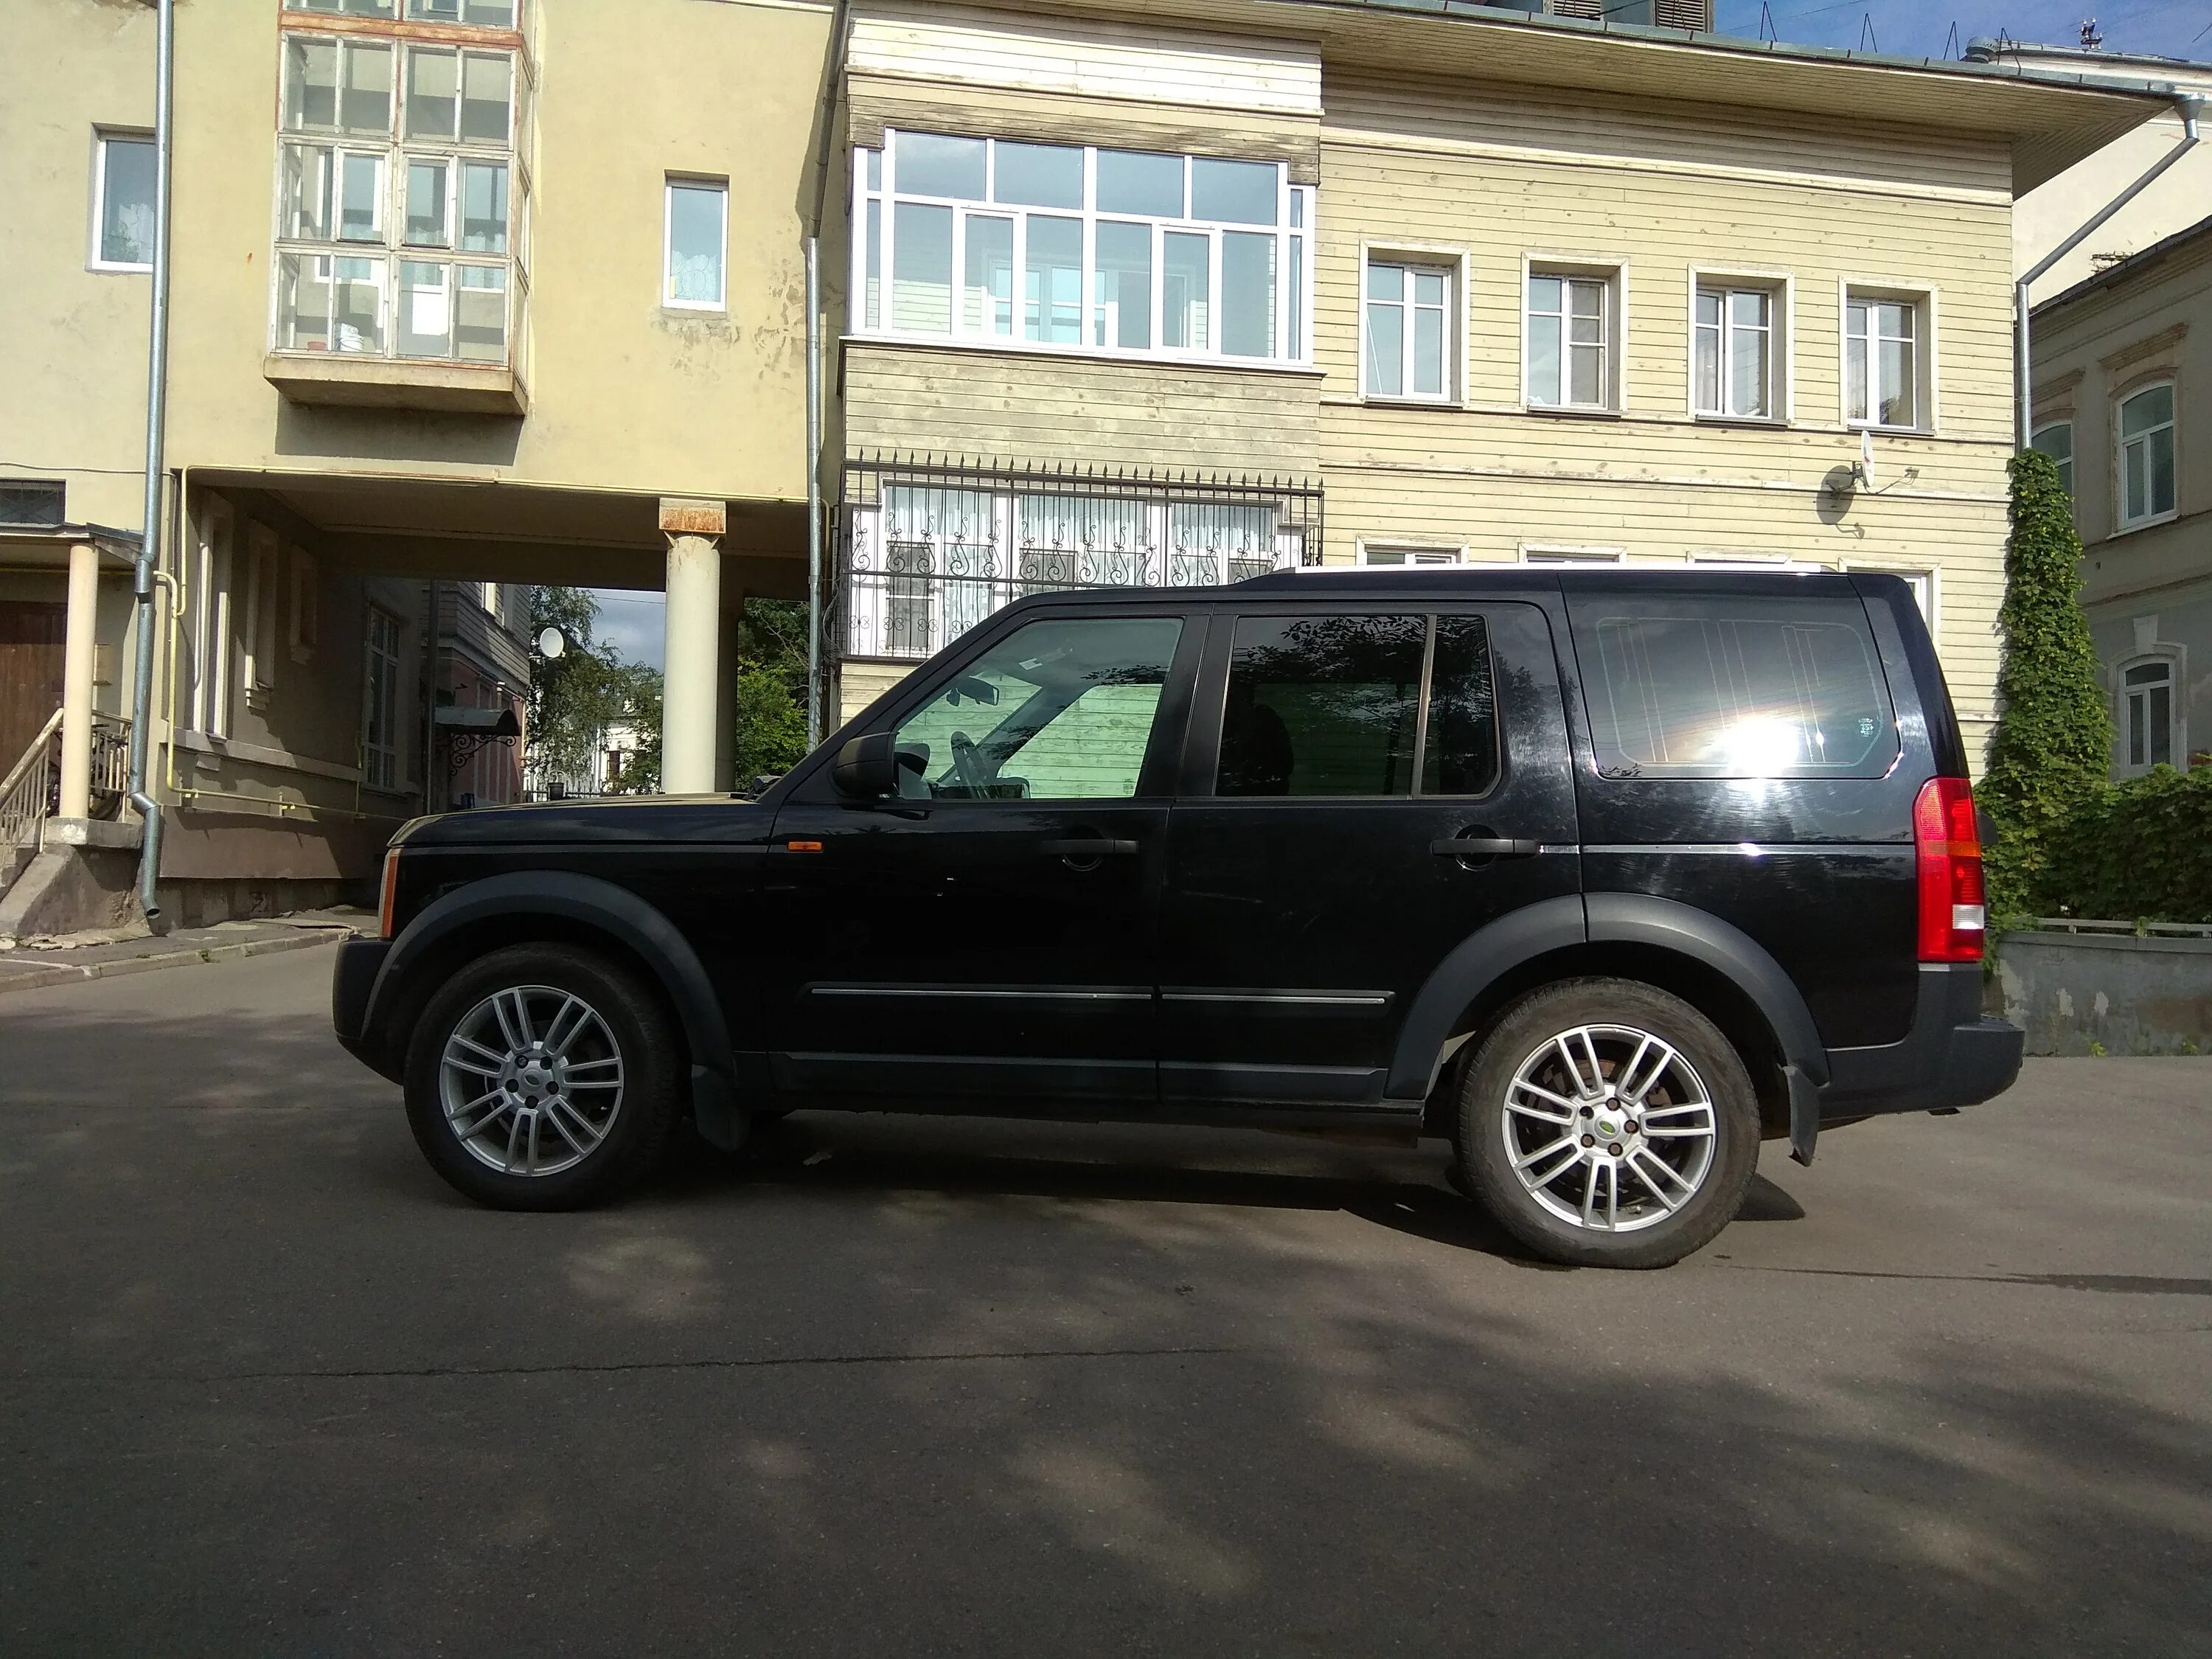 Land Rover Discovery 3 r19. Колеса 19 Дискавери 3. Дискавери 3 r19 at. Диски Дискавери 3 r19. Шины дискавери 3